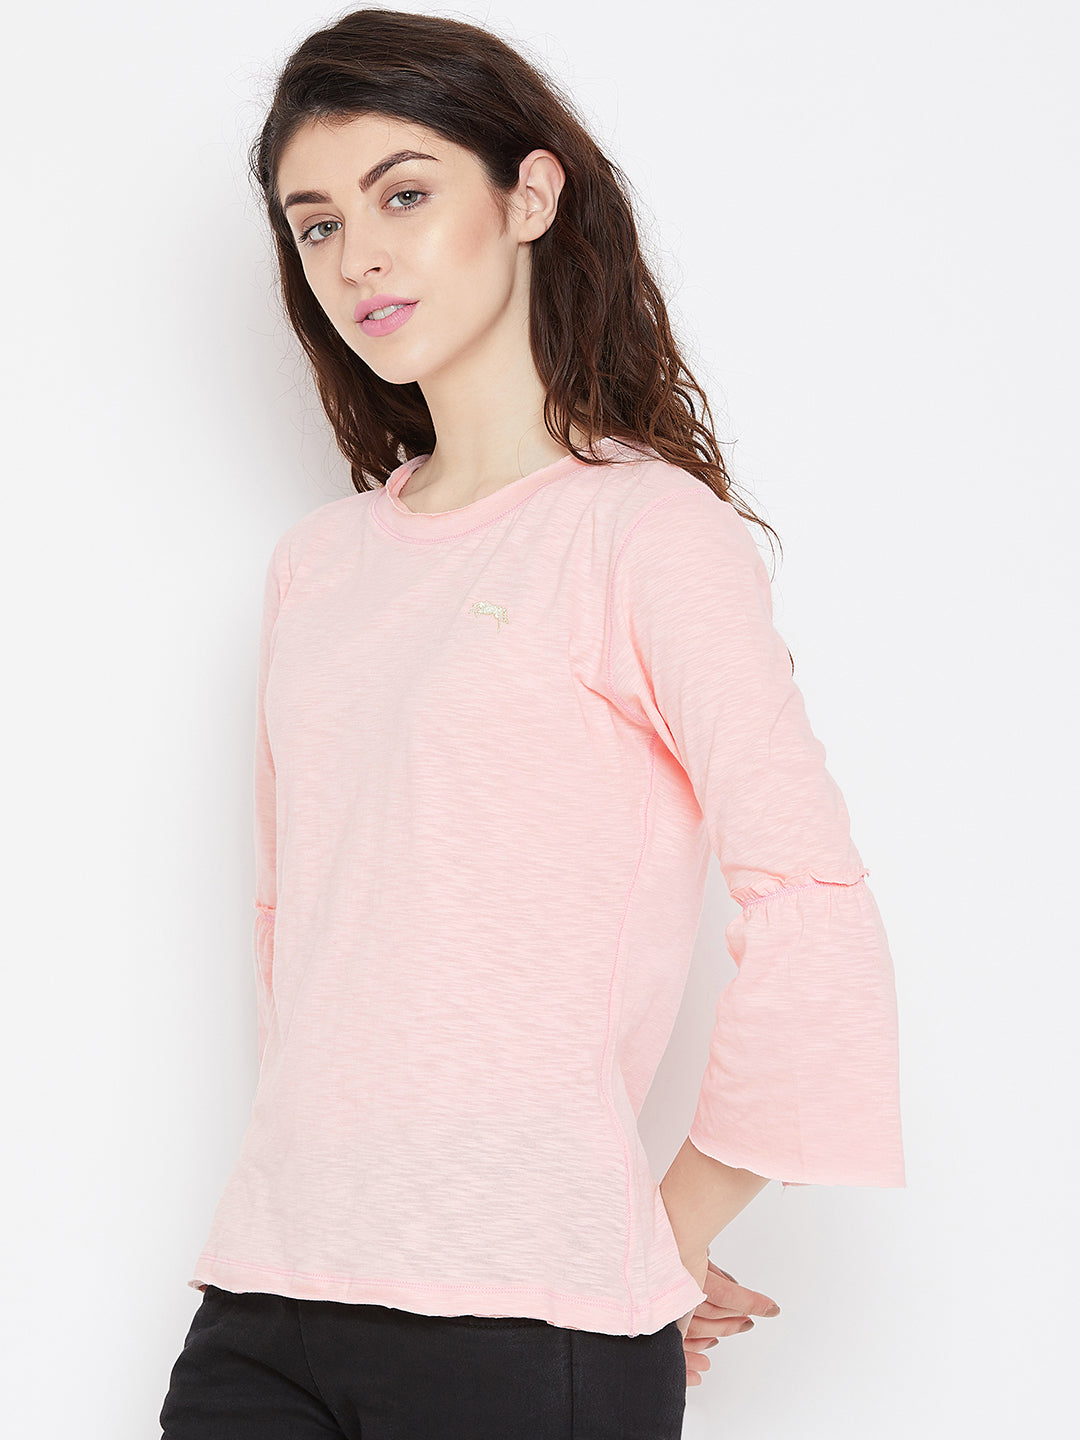 Women Pink Solid Casual Tops - JUMP USA